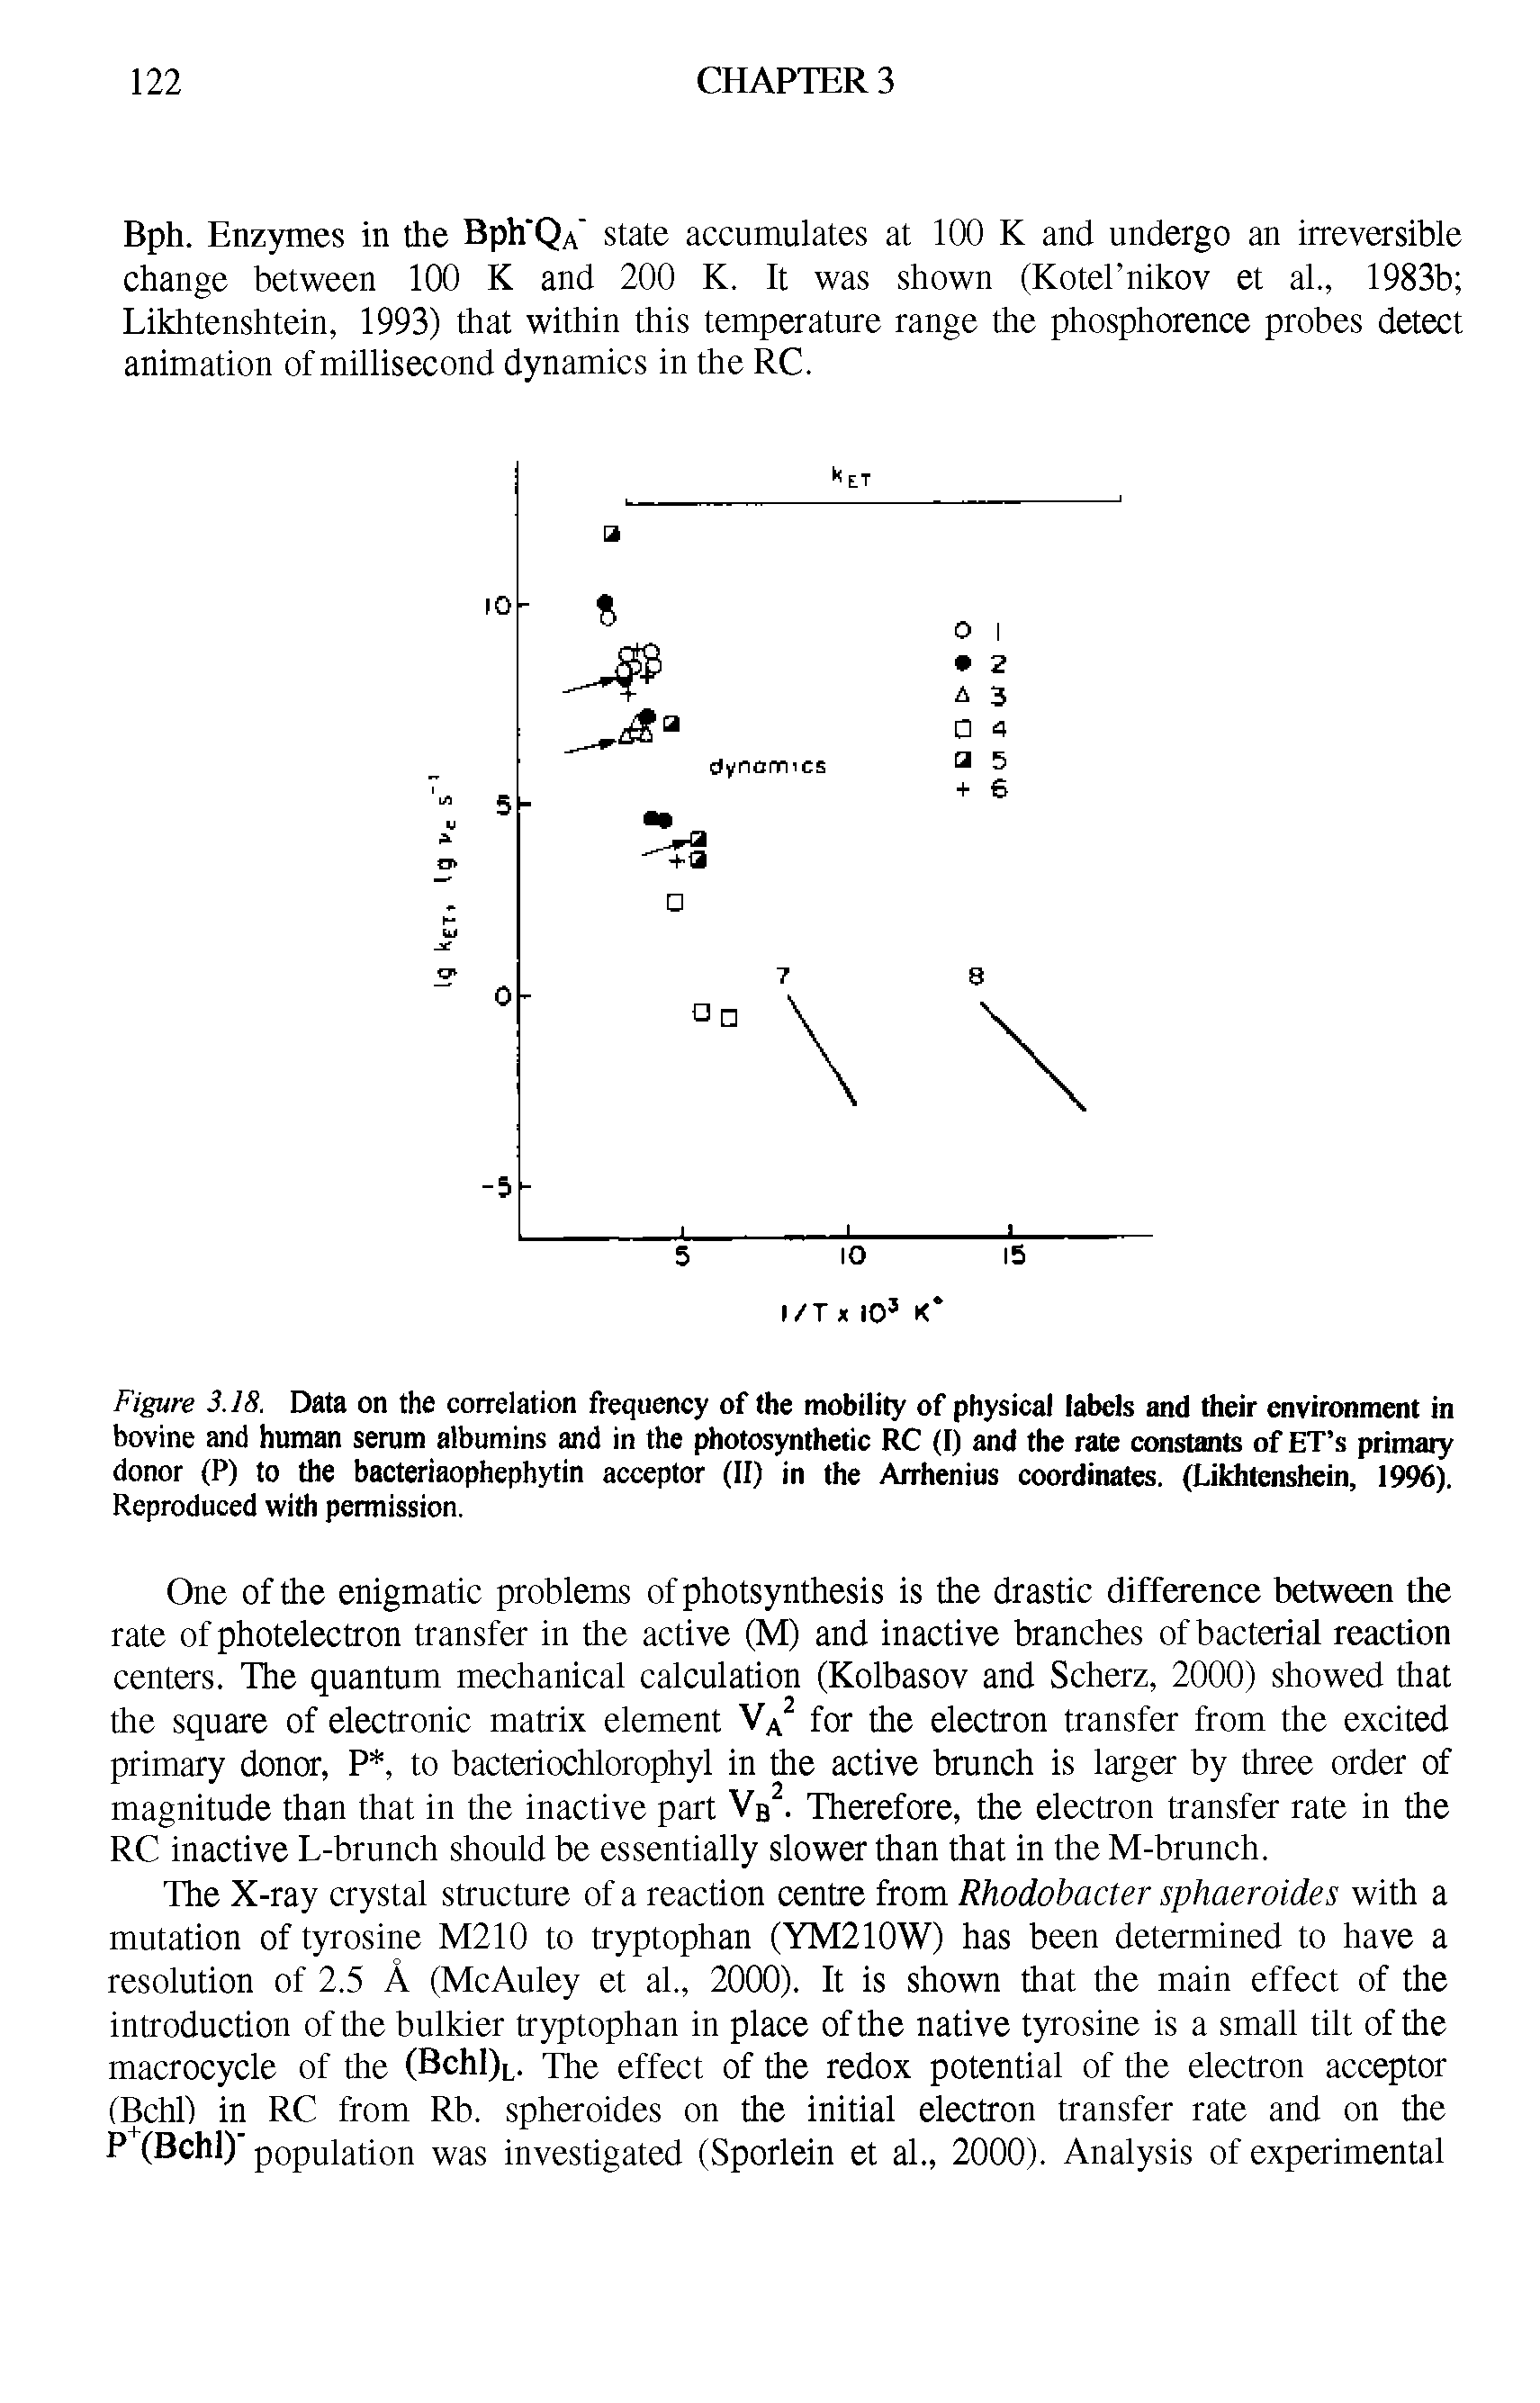 Figure 3.18. Data on the correlation frequency of the mobility of physical labels and their environment in bovine and human serum albumins and in the photosynthetic RC (I) and the rate constants of ET s primary donor (P) to the bacteriaophephytin acceptor (II) in the Arrhenius coordinates. (Likhtenshein, 1996). Reproduced with permission.